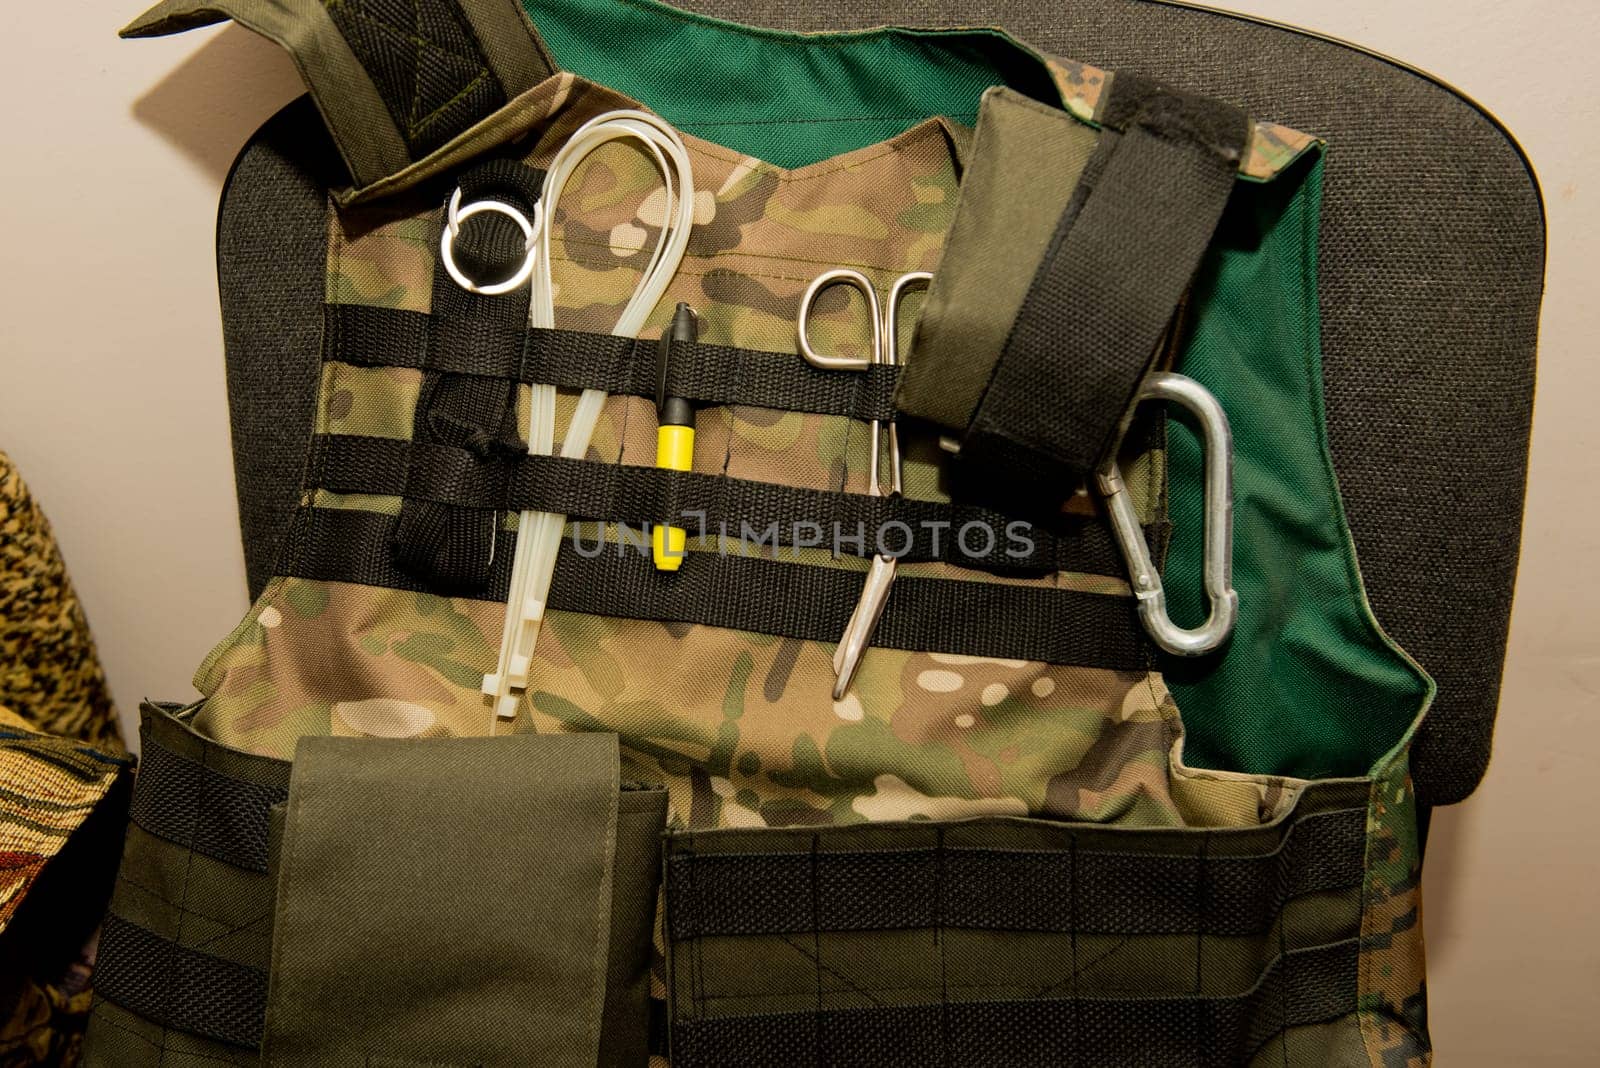 Military body armor with a pouch. Army body armor.